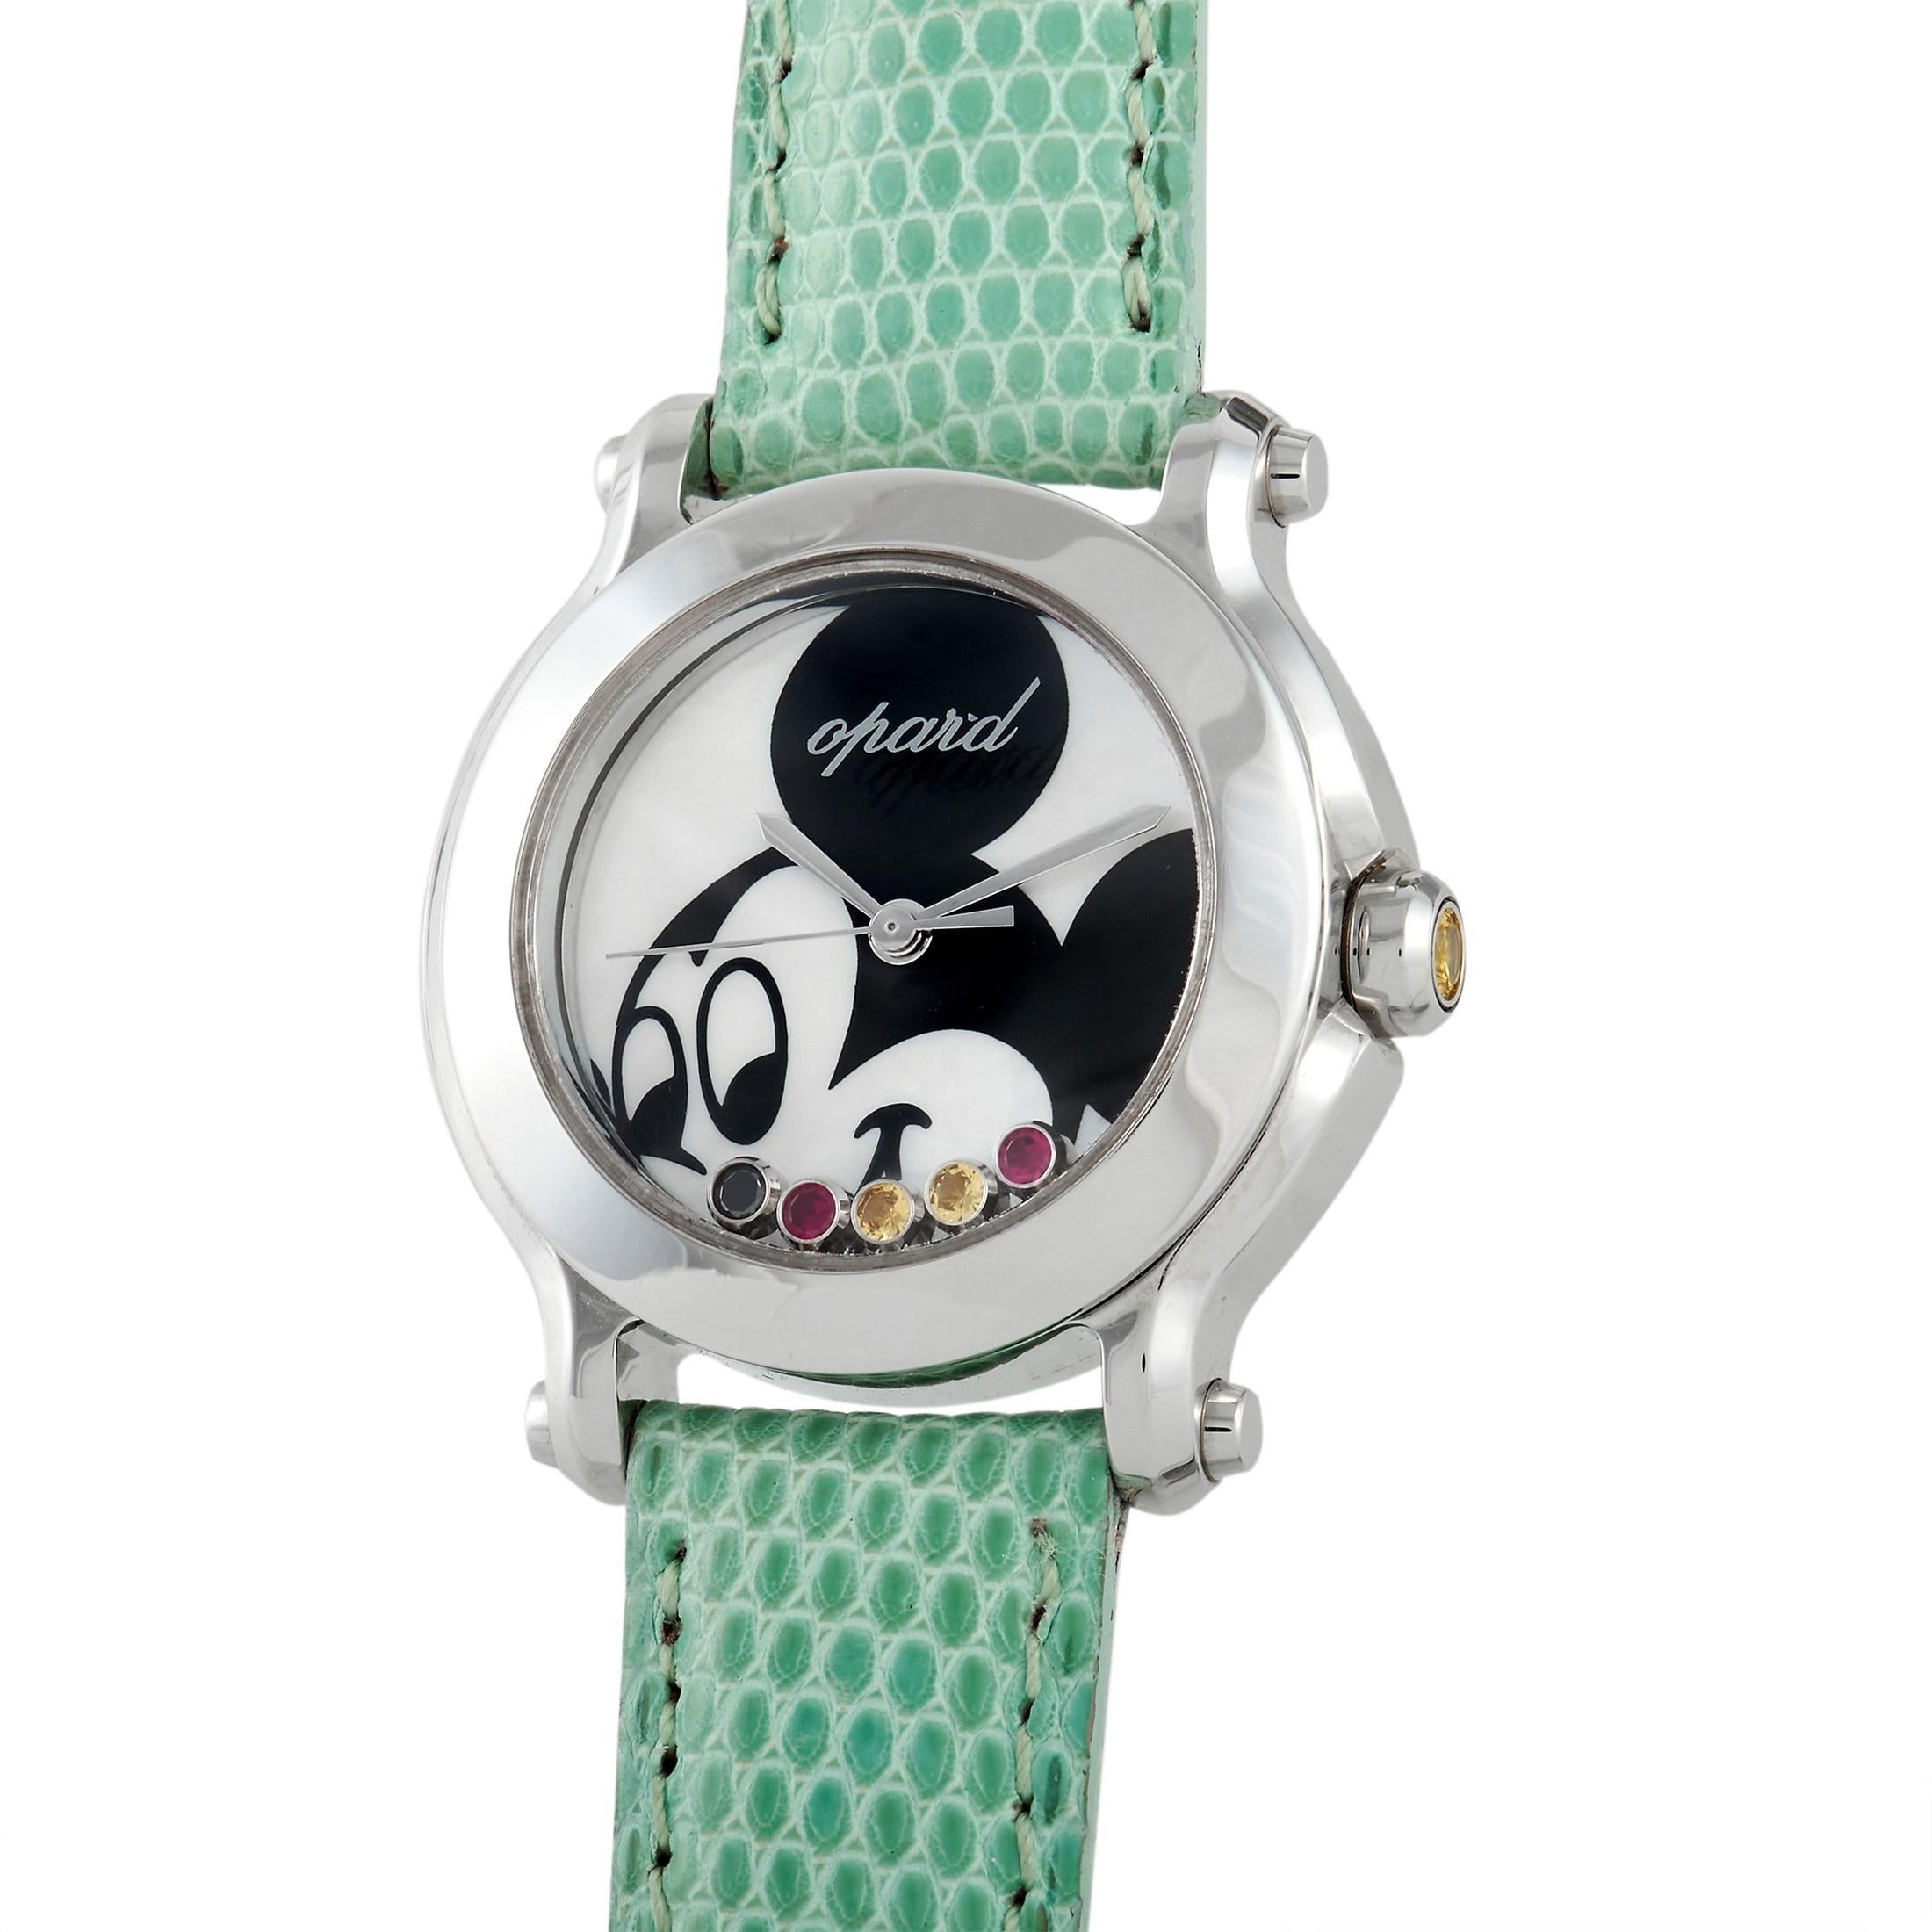 The Chopard Happy Sport Happy Mickey Watch, reference number 278509-3045, is a charming accessory that will instantly add color to your world. 

This fun timepiece features a round stainless steel 30mm case attached to an aqua-colored strap. On the